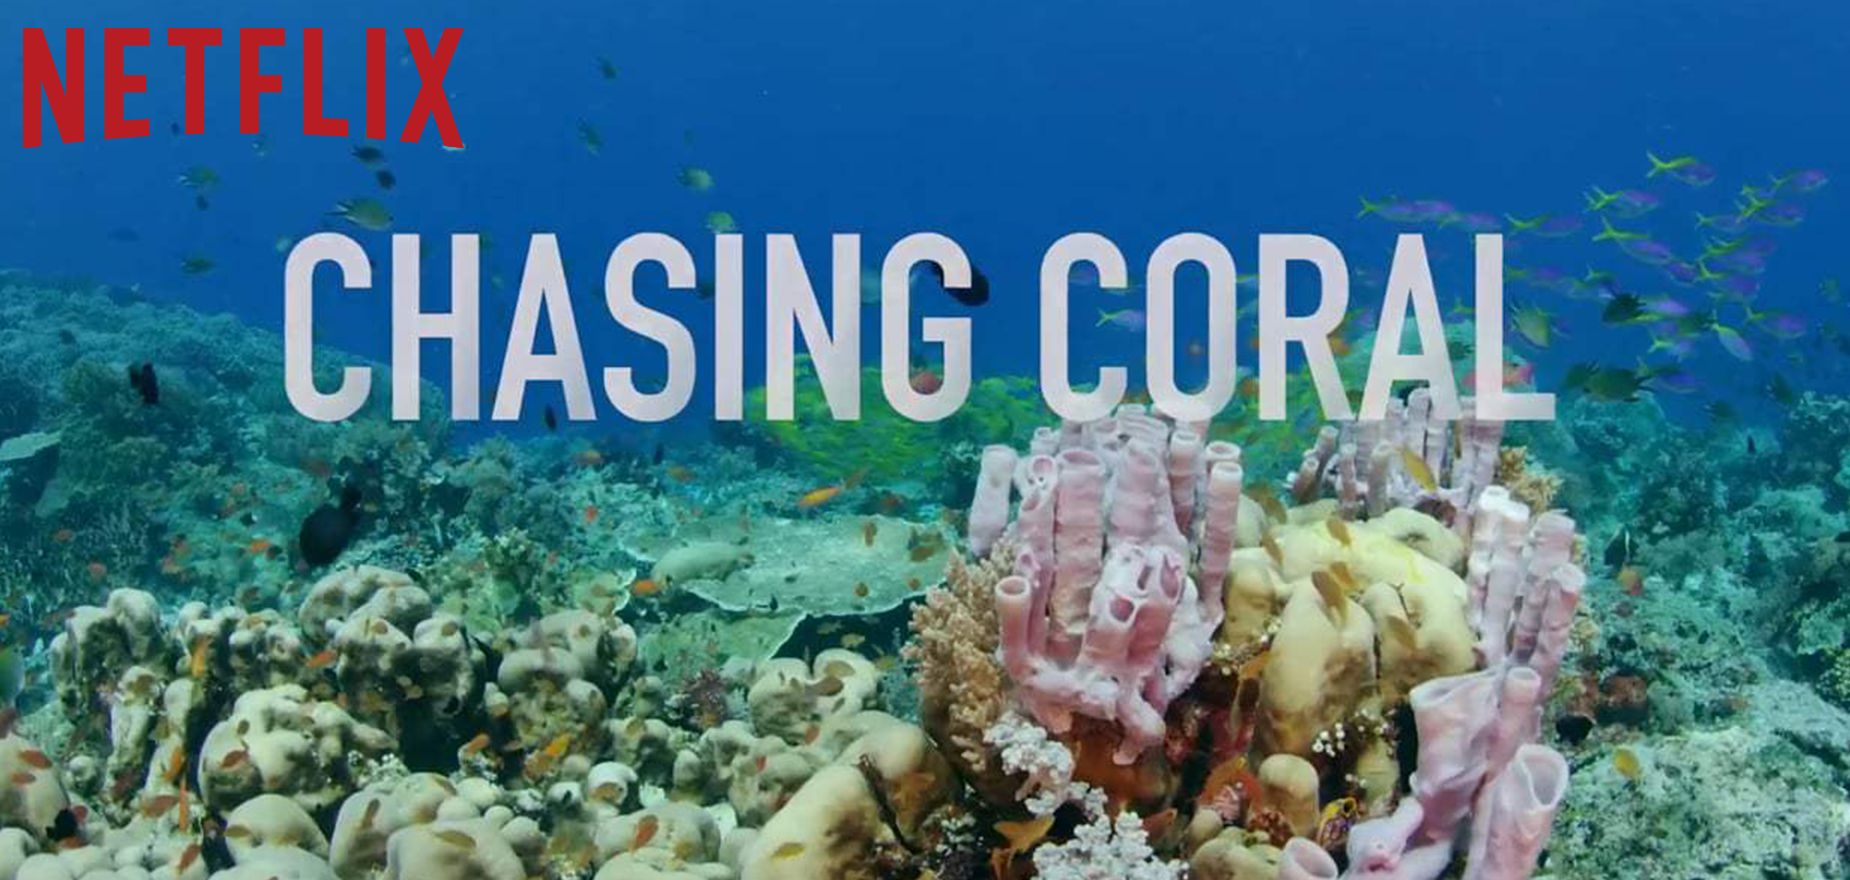 Chasing Coral - An Exposure Labs Production in partnership with The Ocean Agency + View Into the Blue in association with Argent Pictures